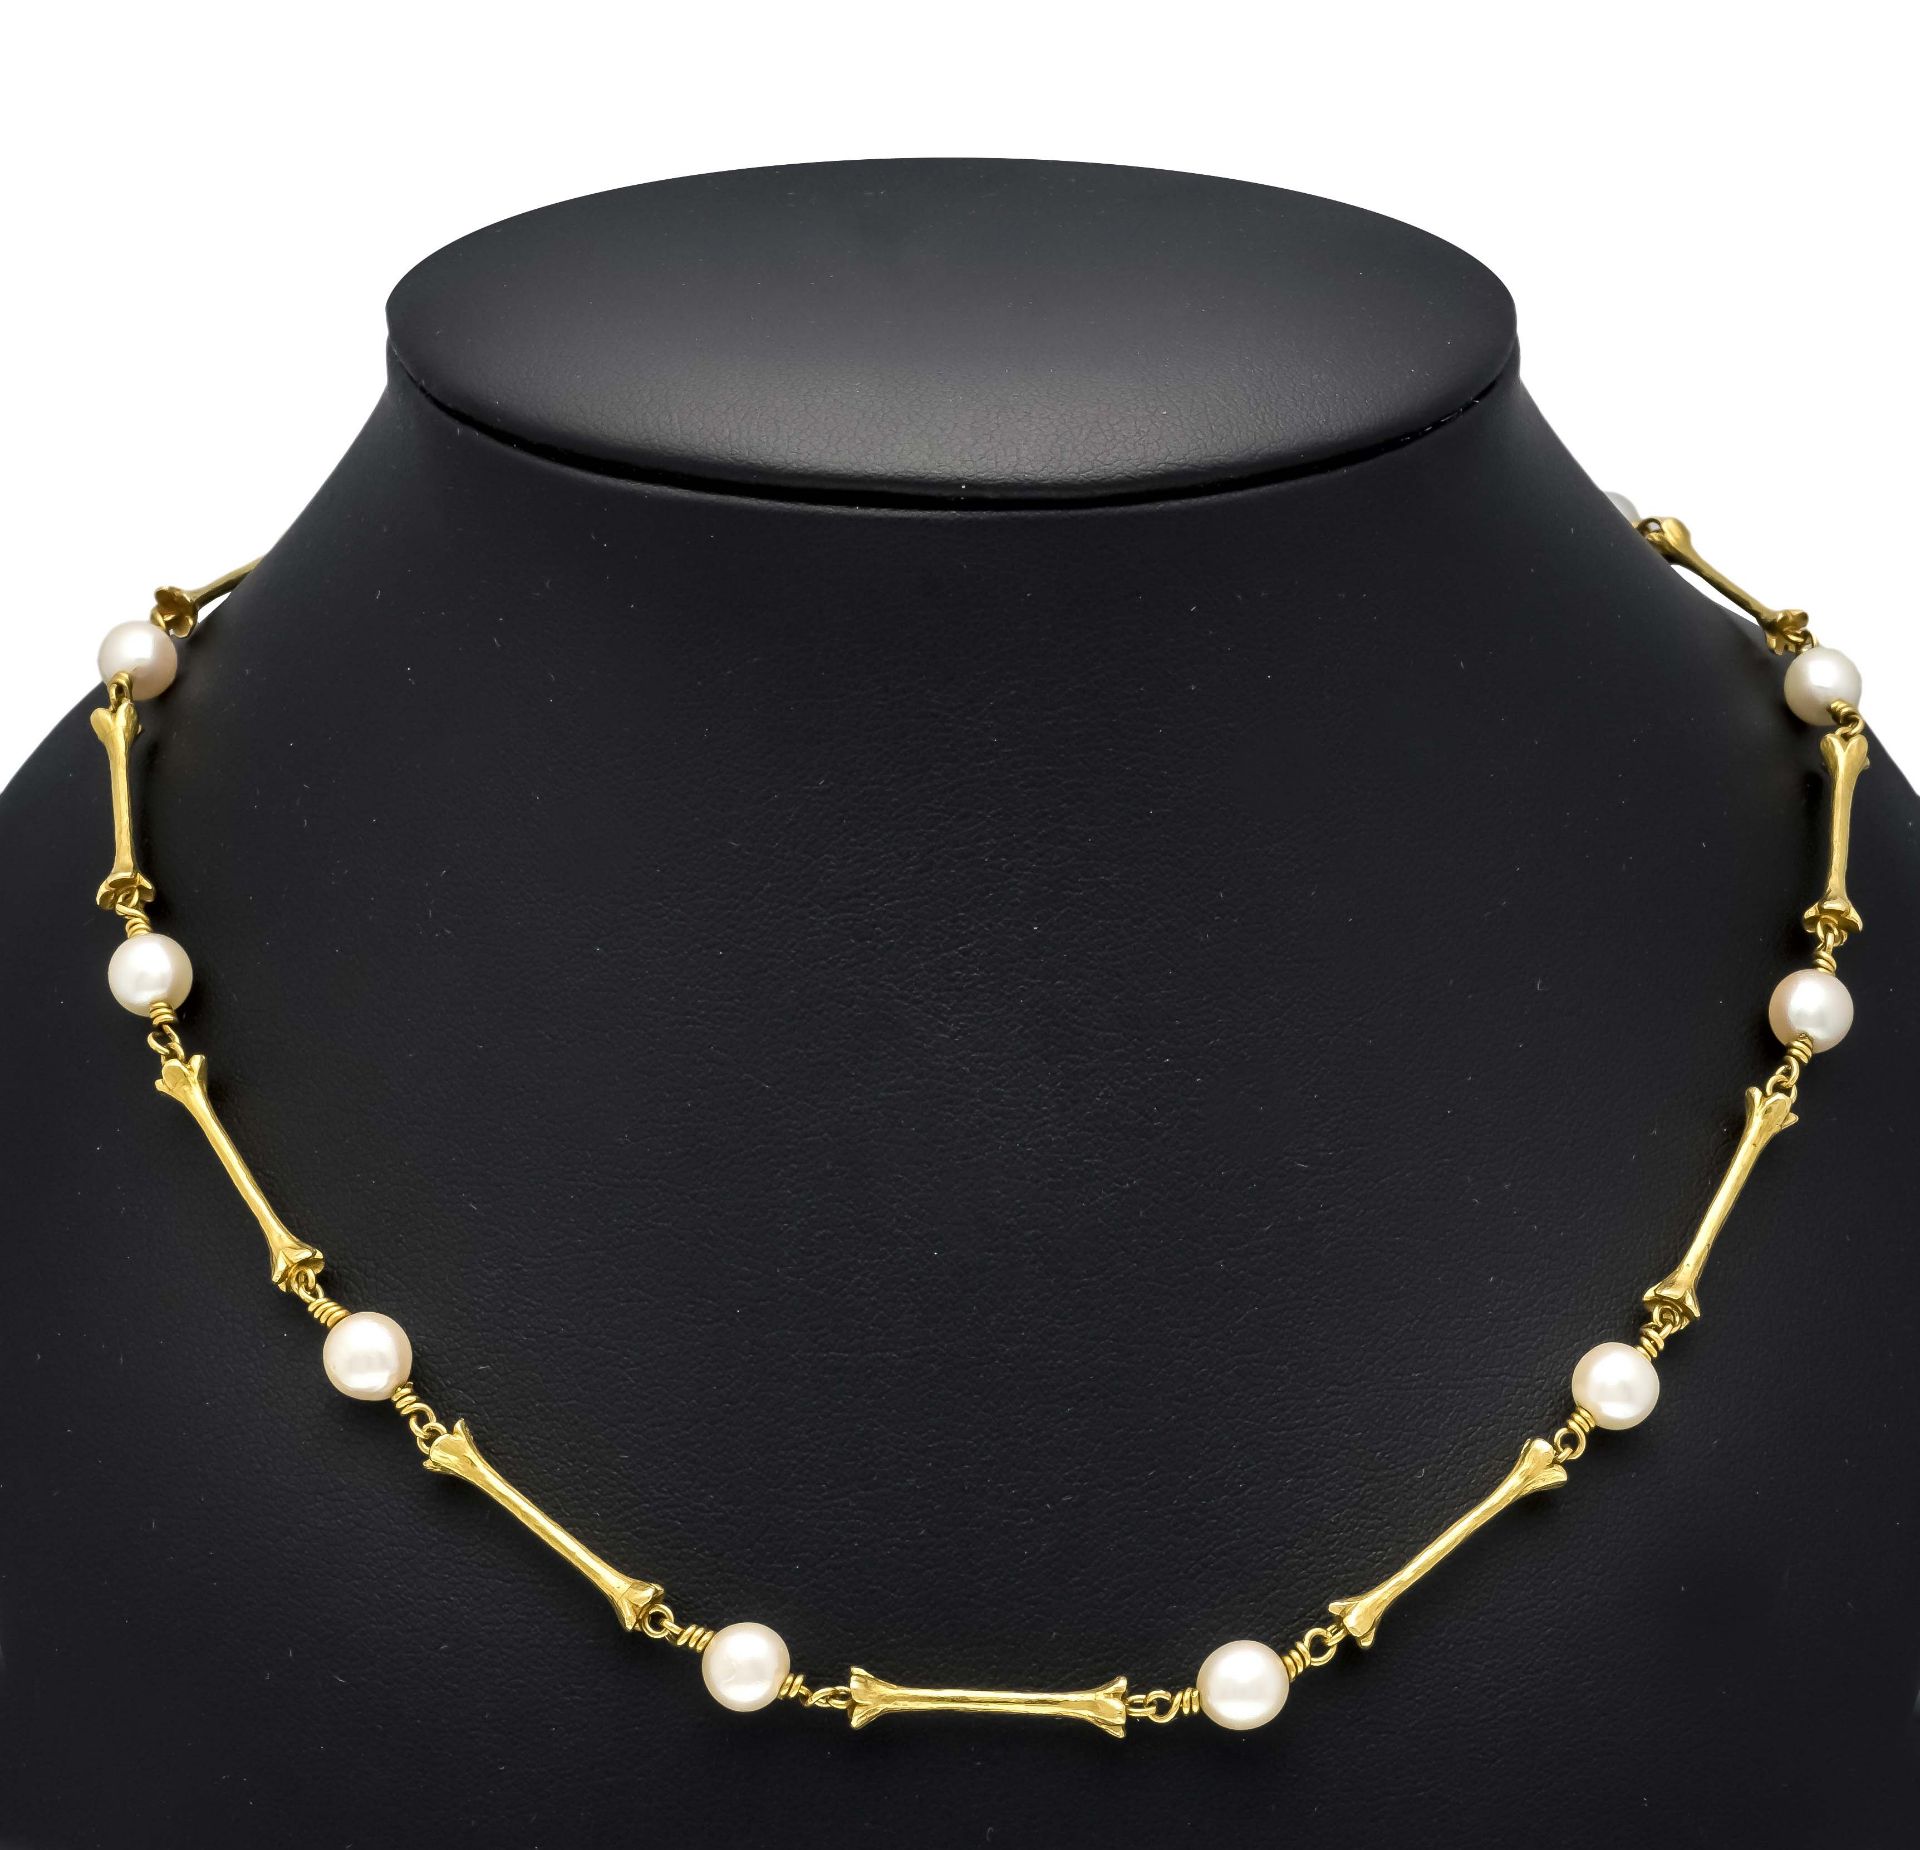 Link necklace GG 750/000 of naturalistic, bar-shaped links alternating with cream-white Akoya pearls